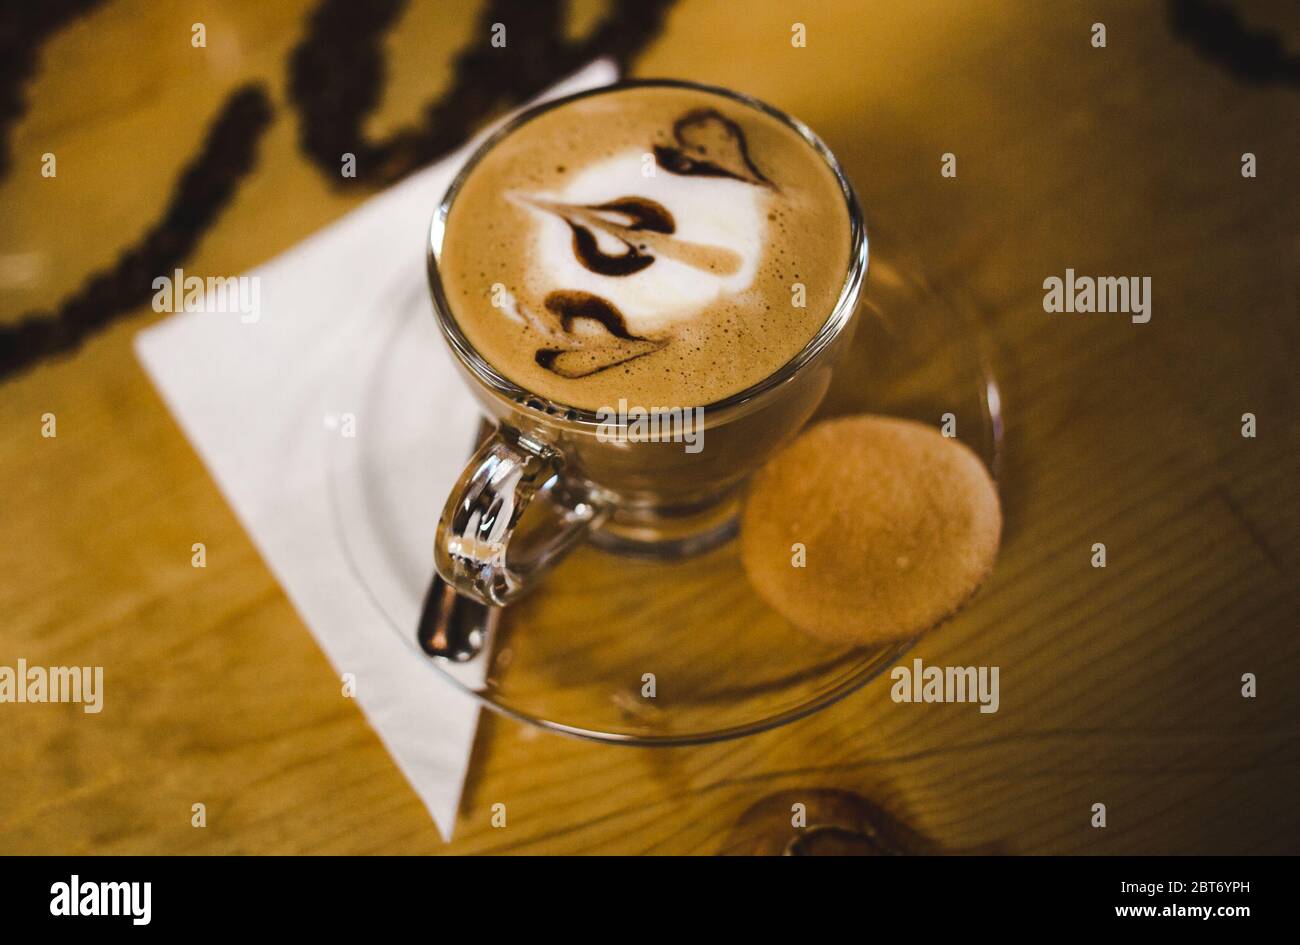 Warm brown tones of a Cuban coffee served with a biscuit in Miami's famous Little Havana district Stock Photo